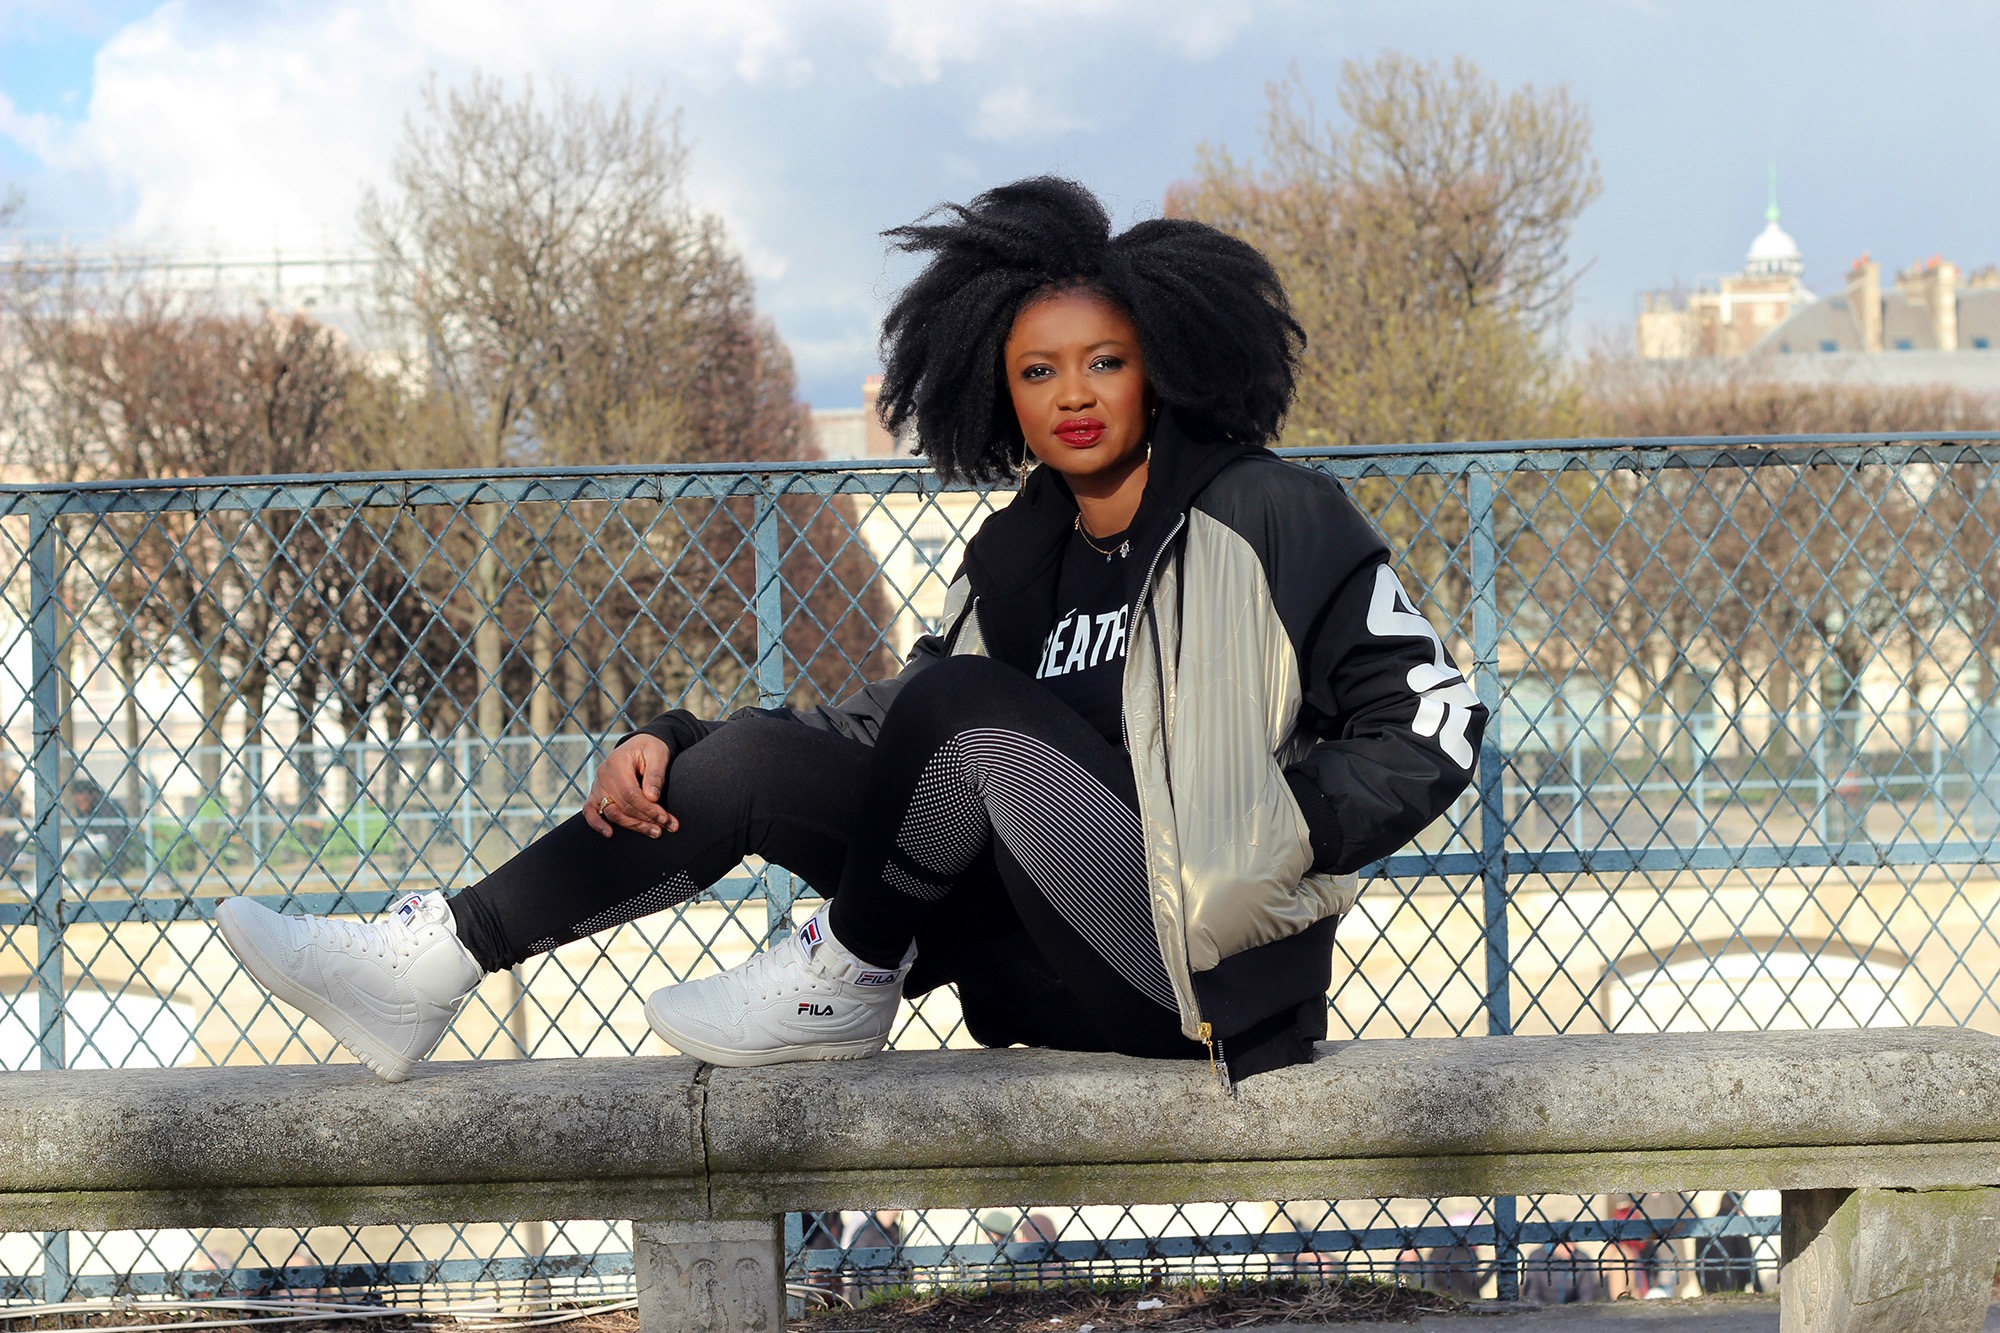 fila sneakers jacket outfit sunday chill streetwear